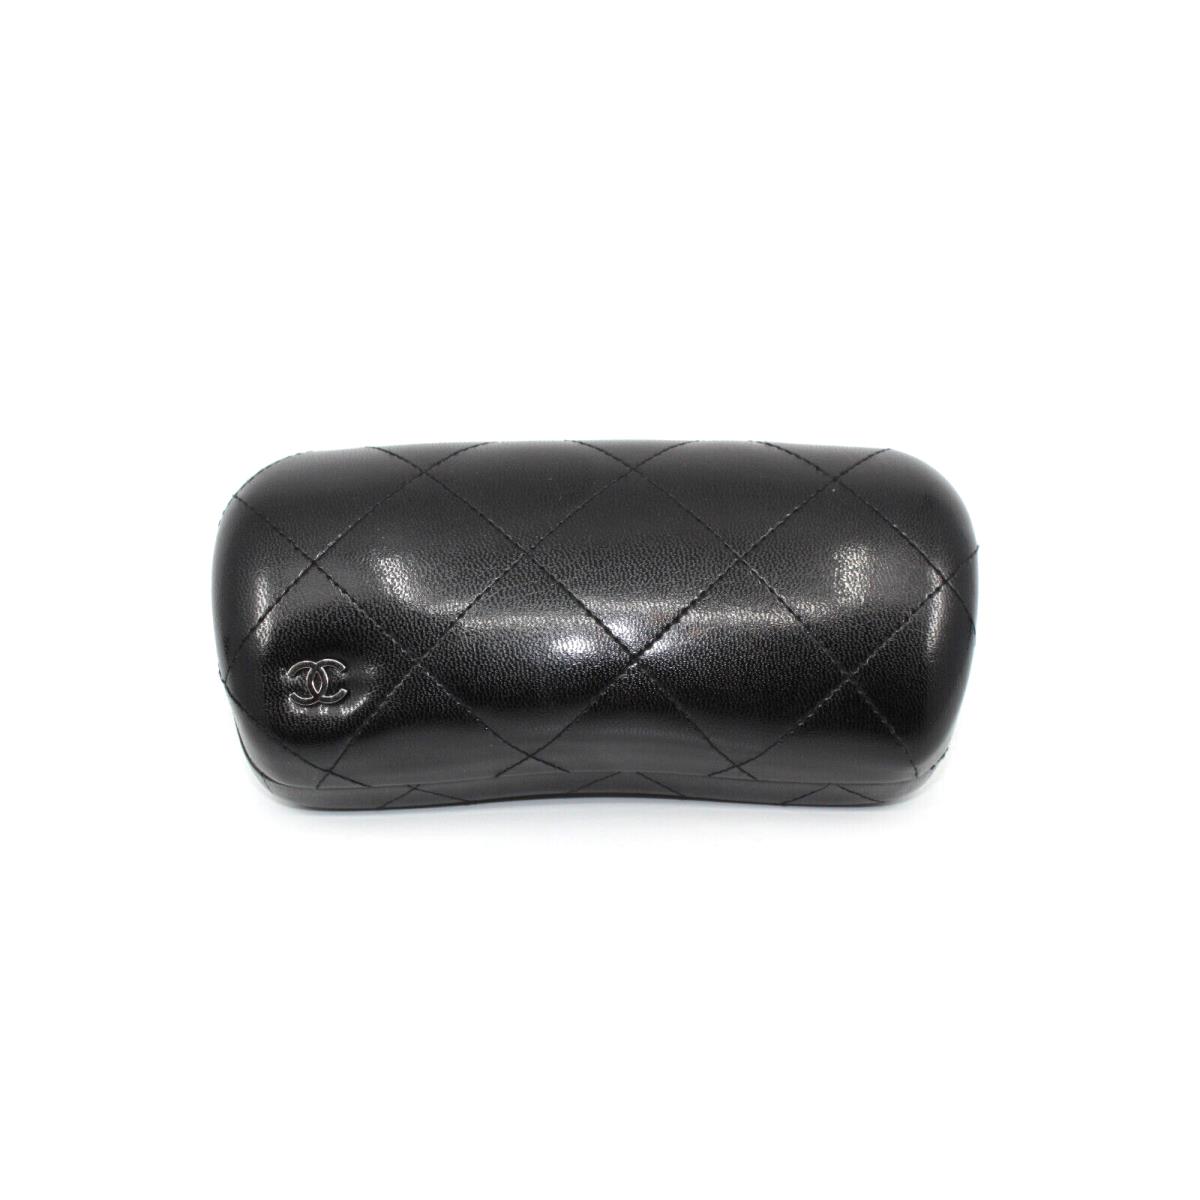 A8 Flawless Chanel Quilted Sunglass Case Black